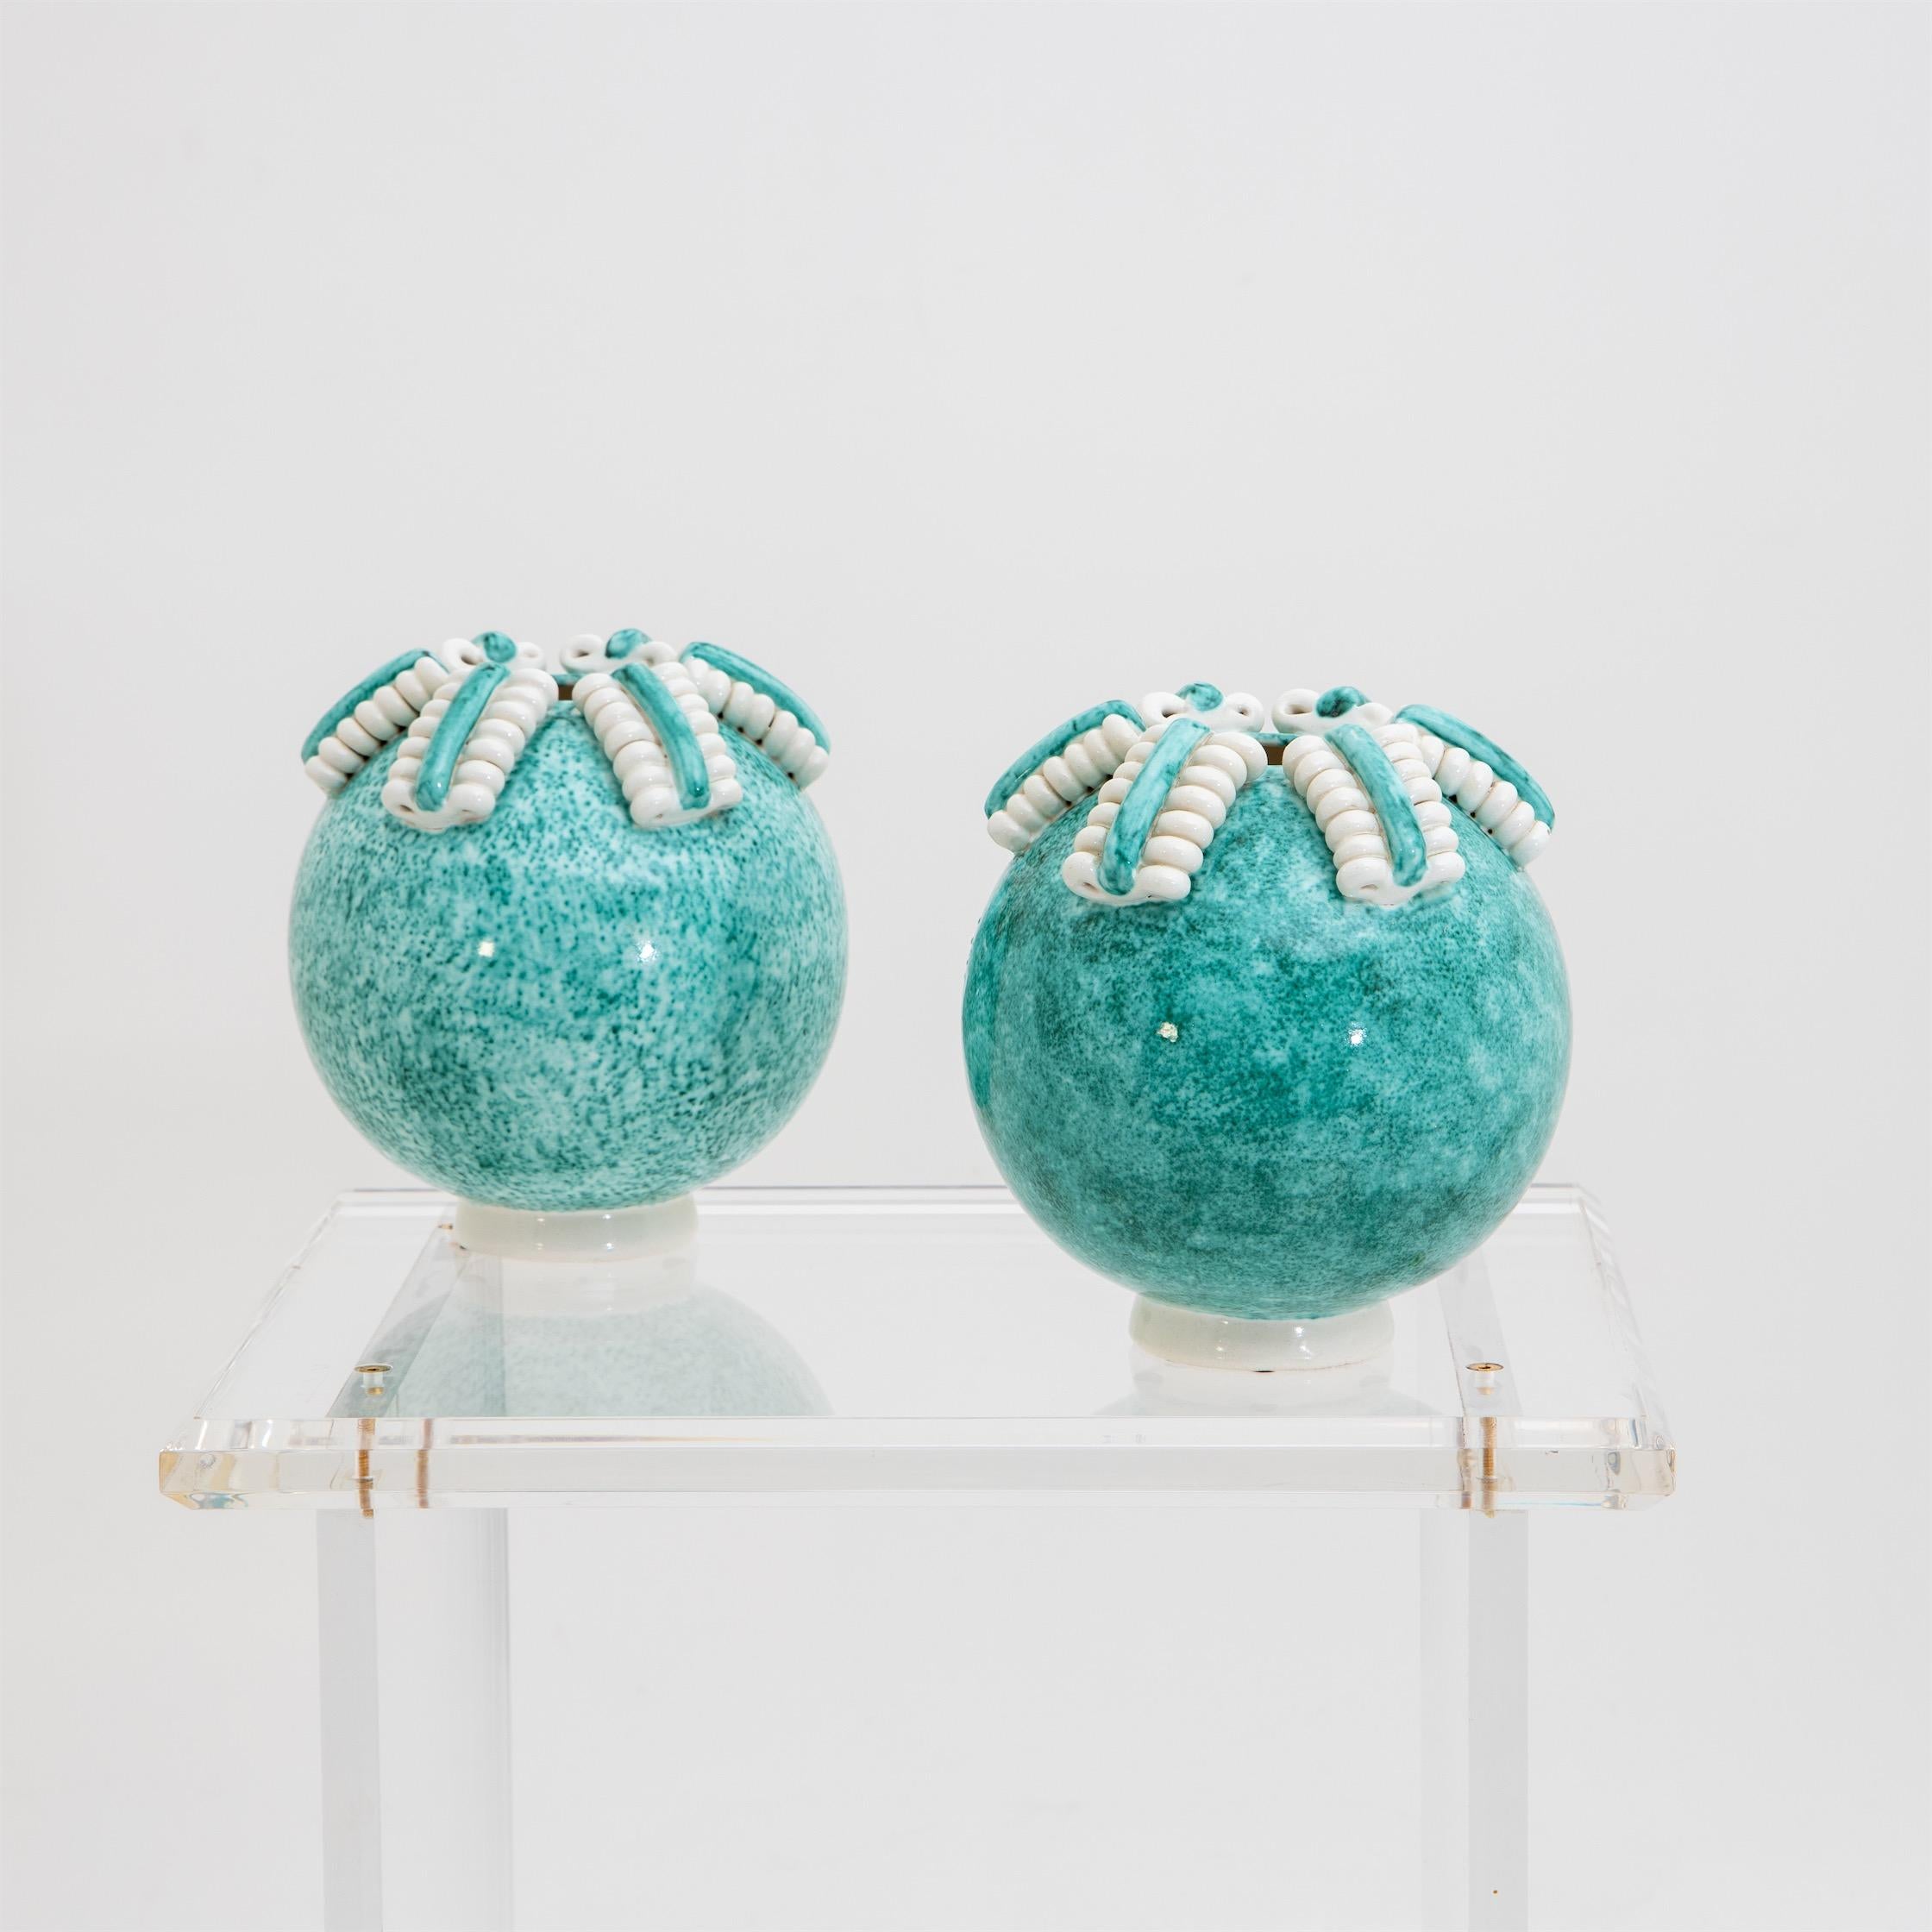 Pair of spherical turquoise-blue vases with cream spiral decoration by Gustave Asch (1836-1911) for Sainte Radegonde. Marked on the bottom.